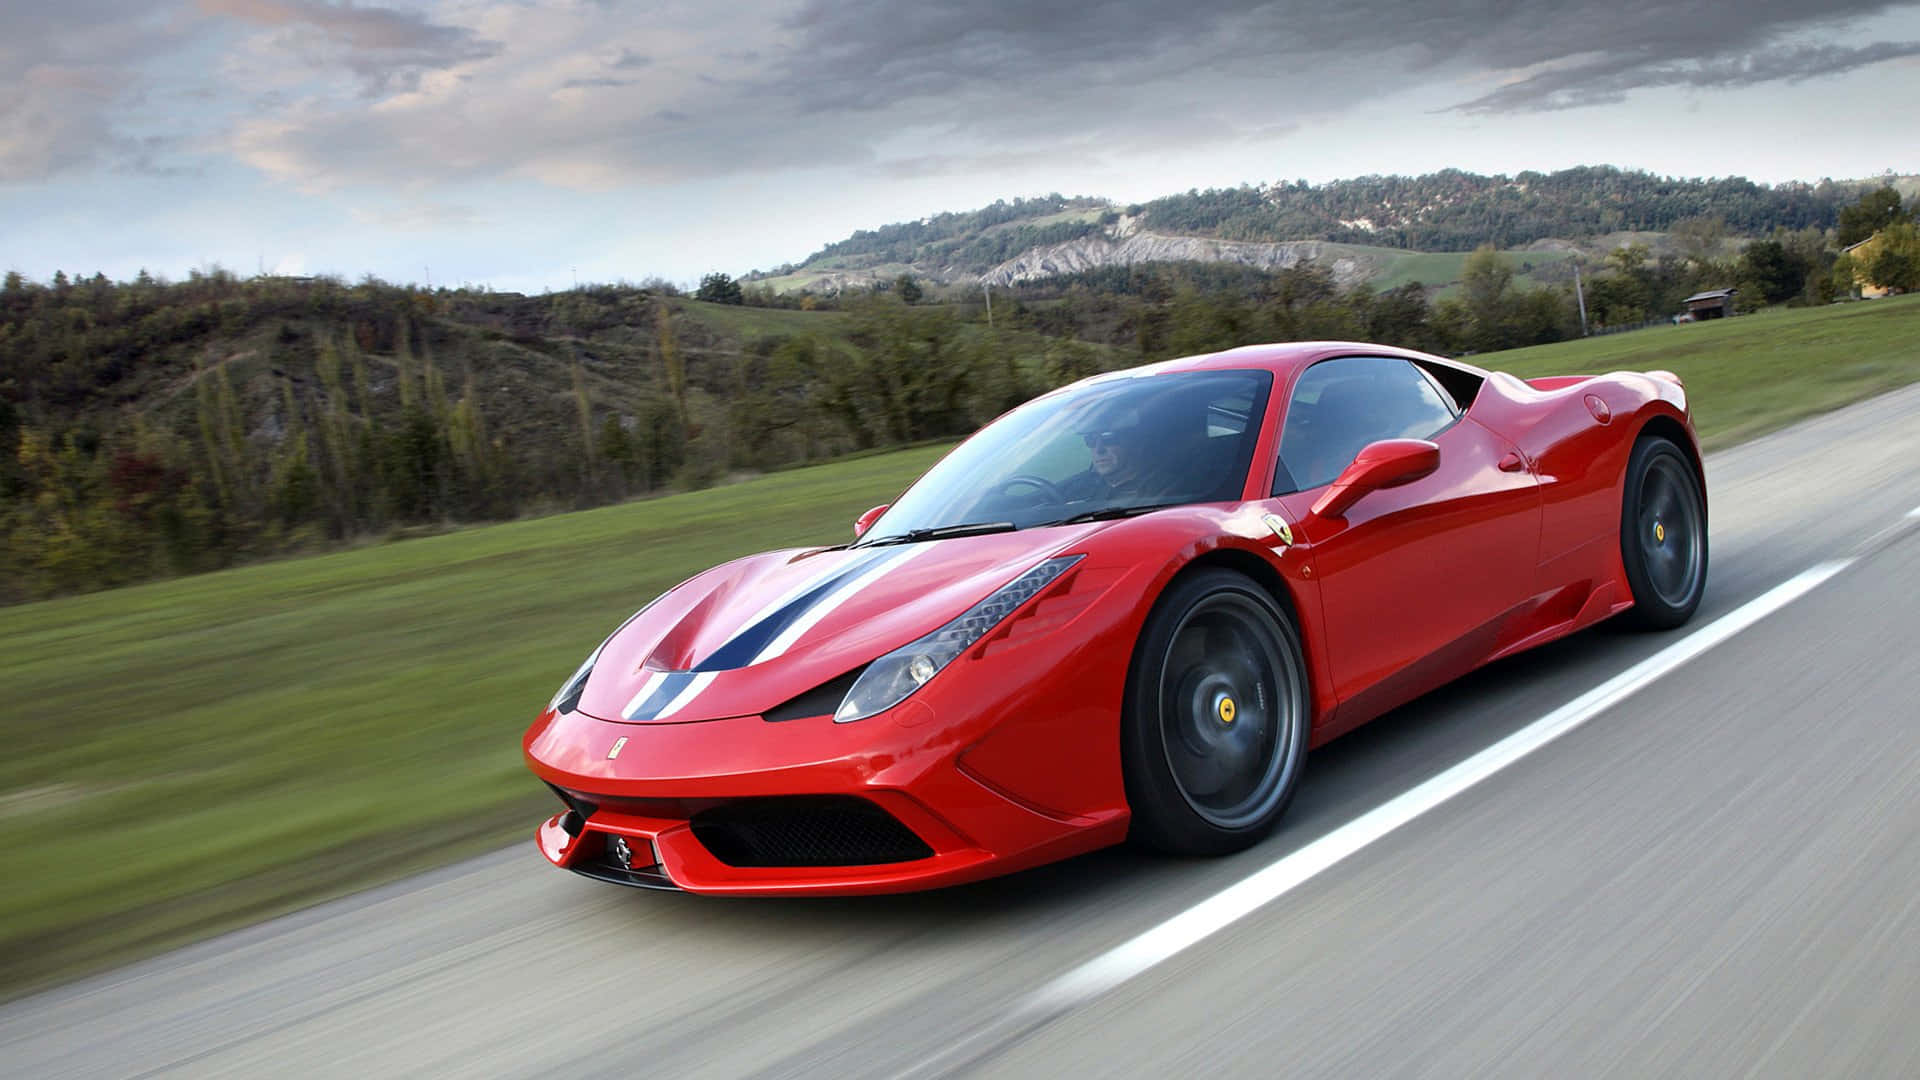 Stunning Red Ferrari 458 Speciale on a Race Track Wallpaper